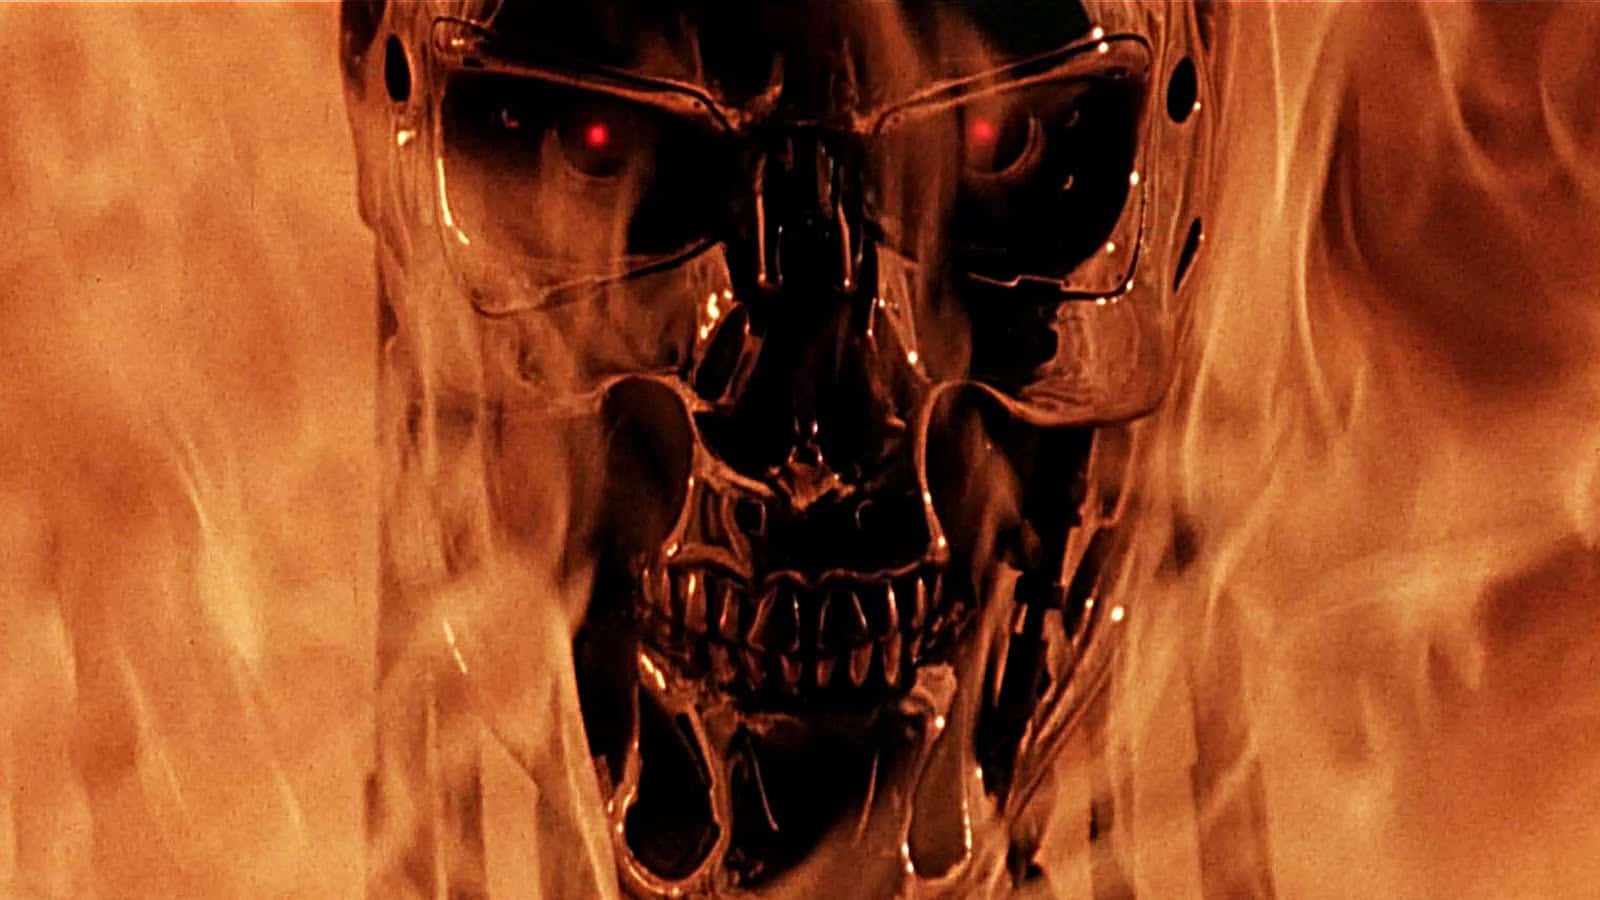 Image of a metal skull in flames